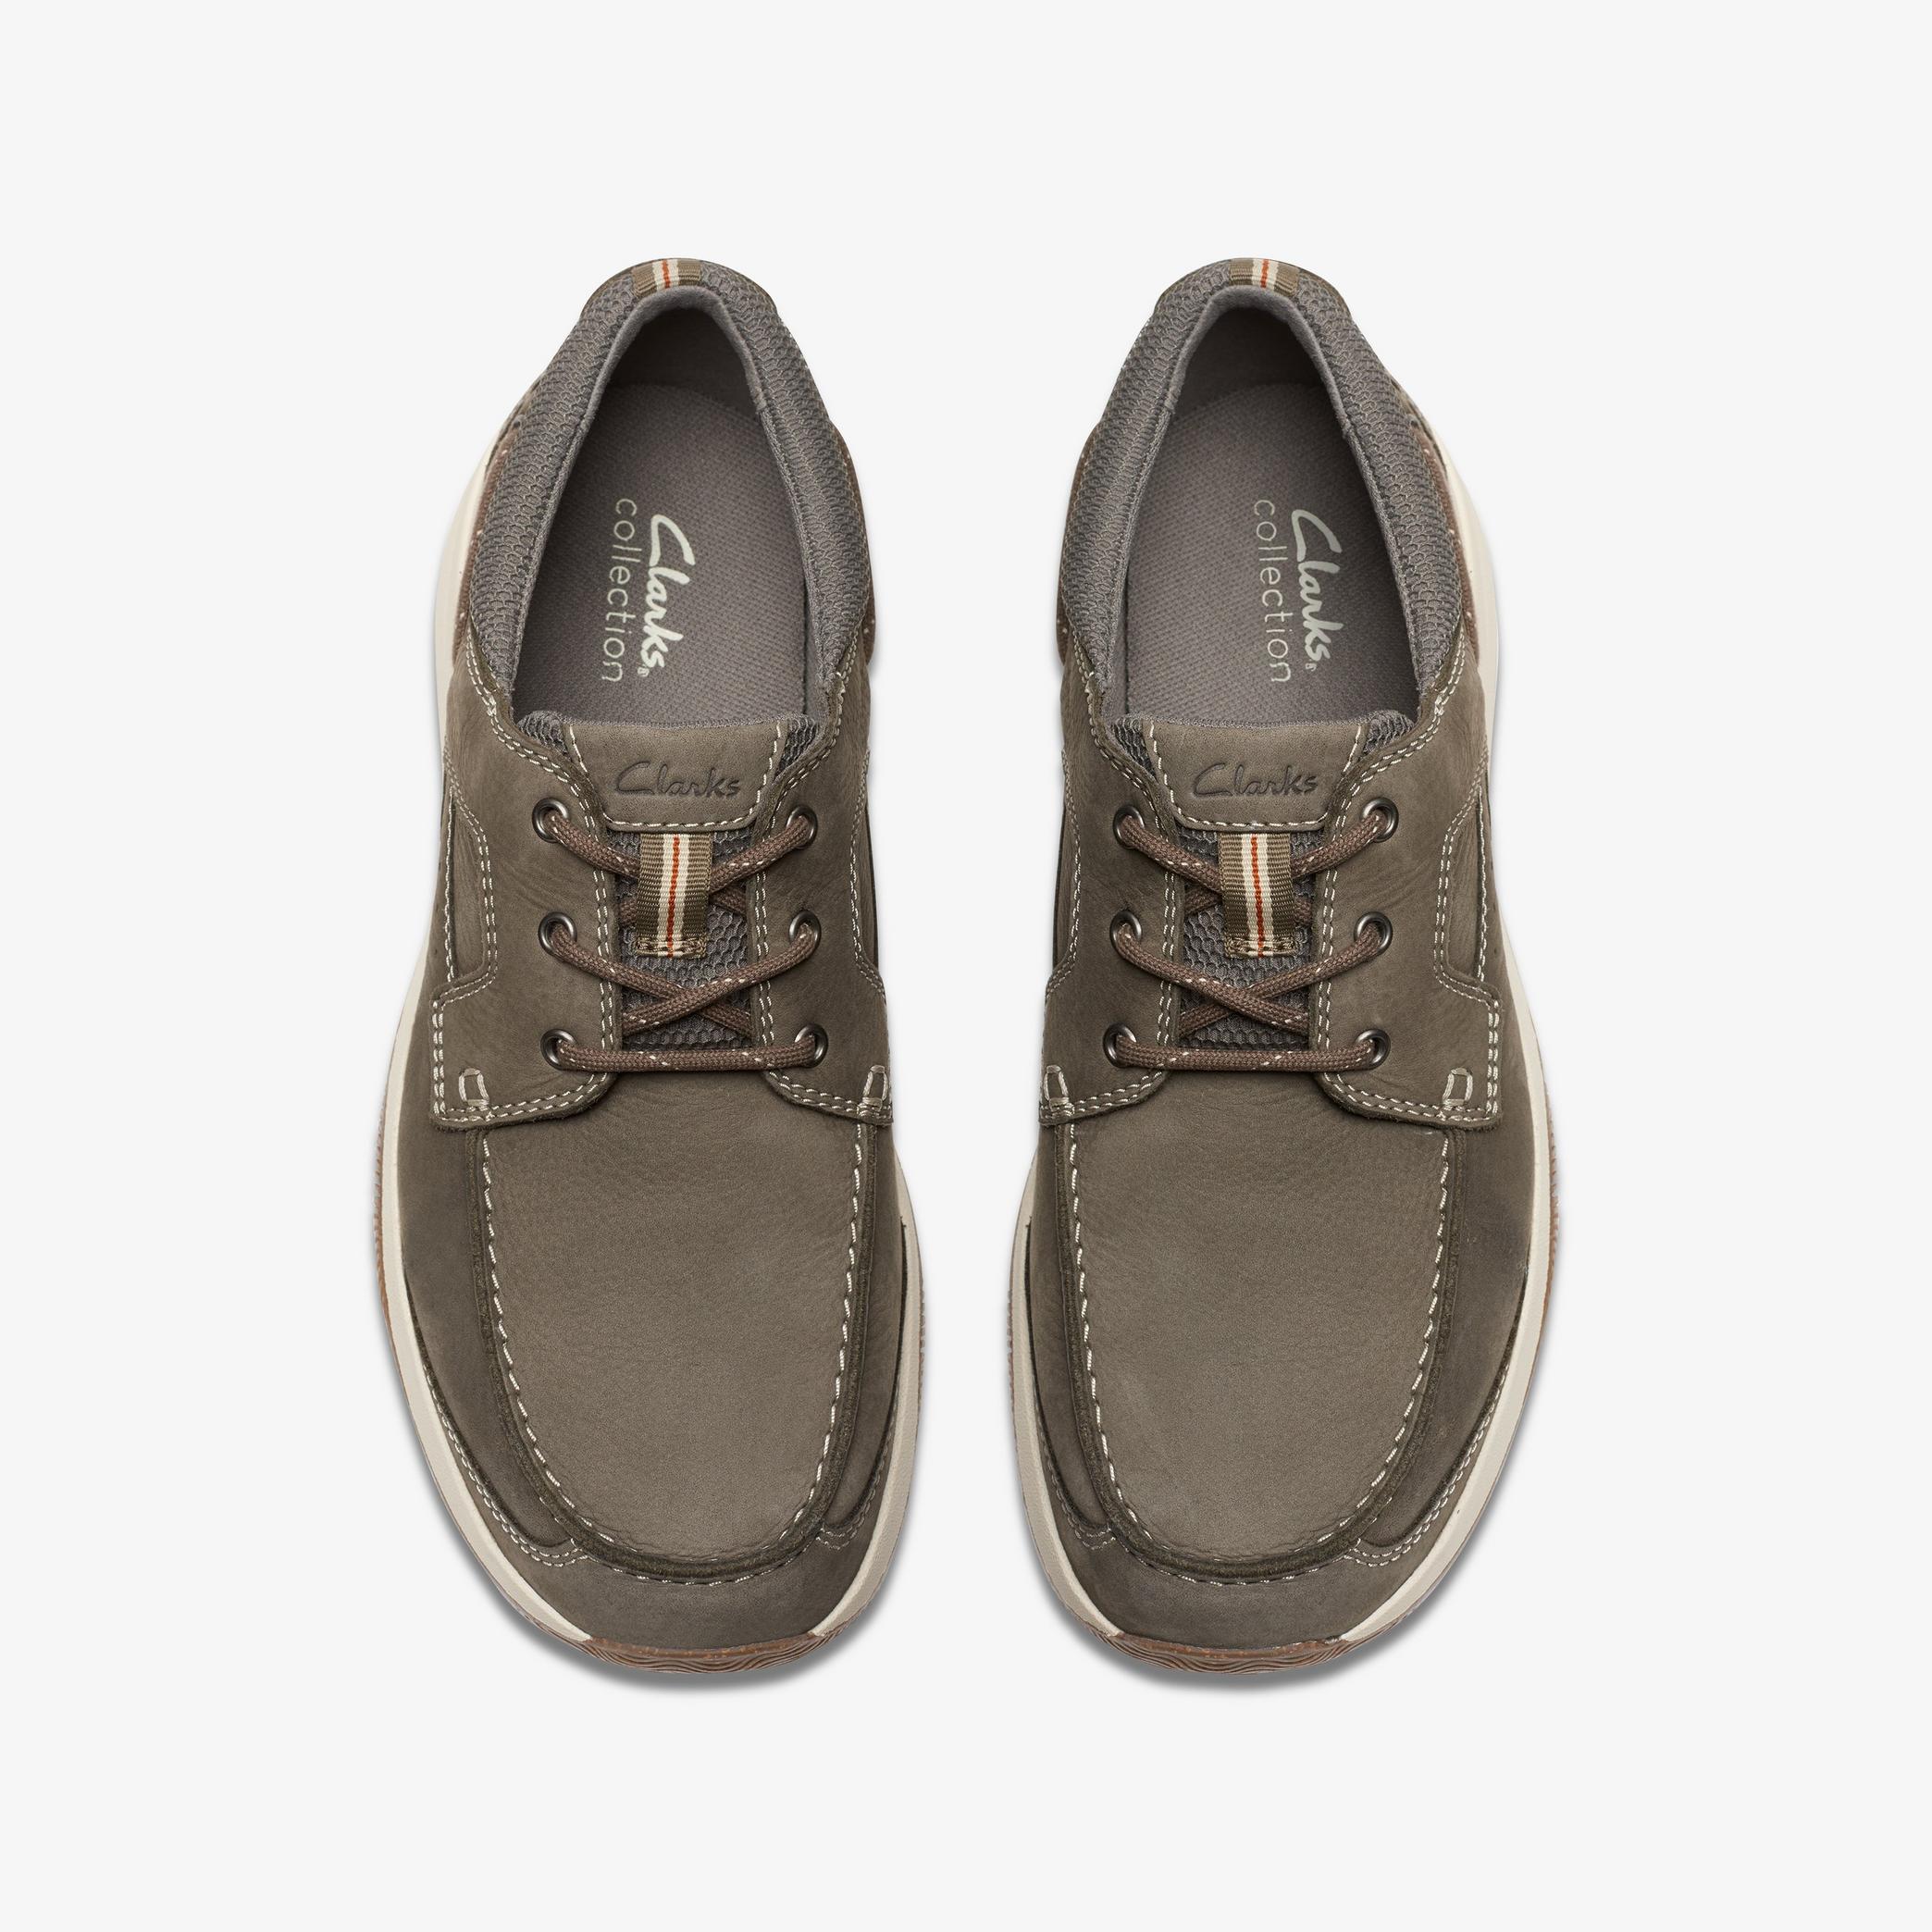 Sailview Lace Taupe Nubuck Boat Shoes, view 6 of 6